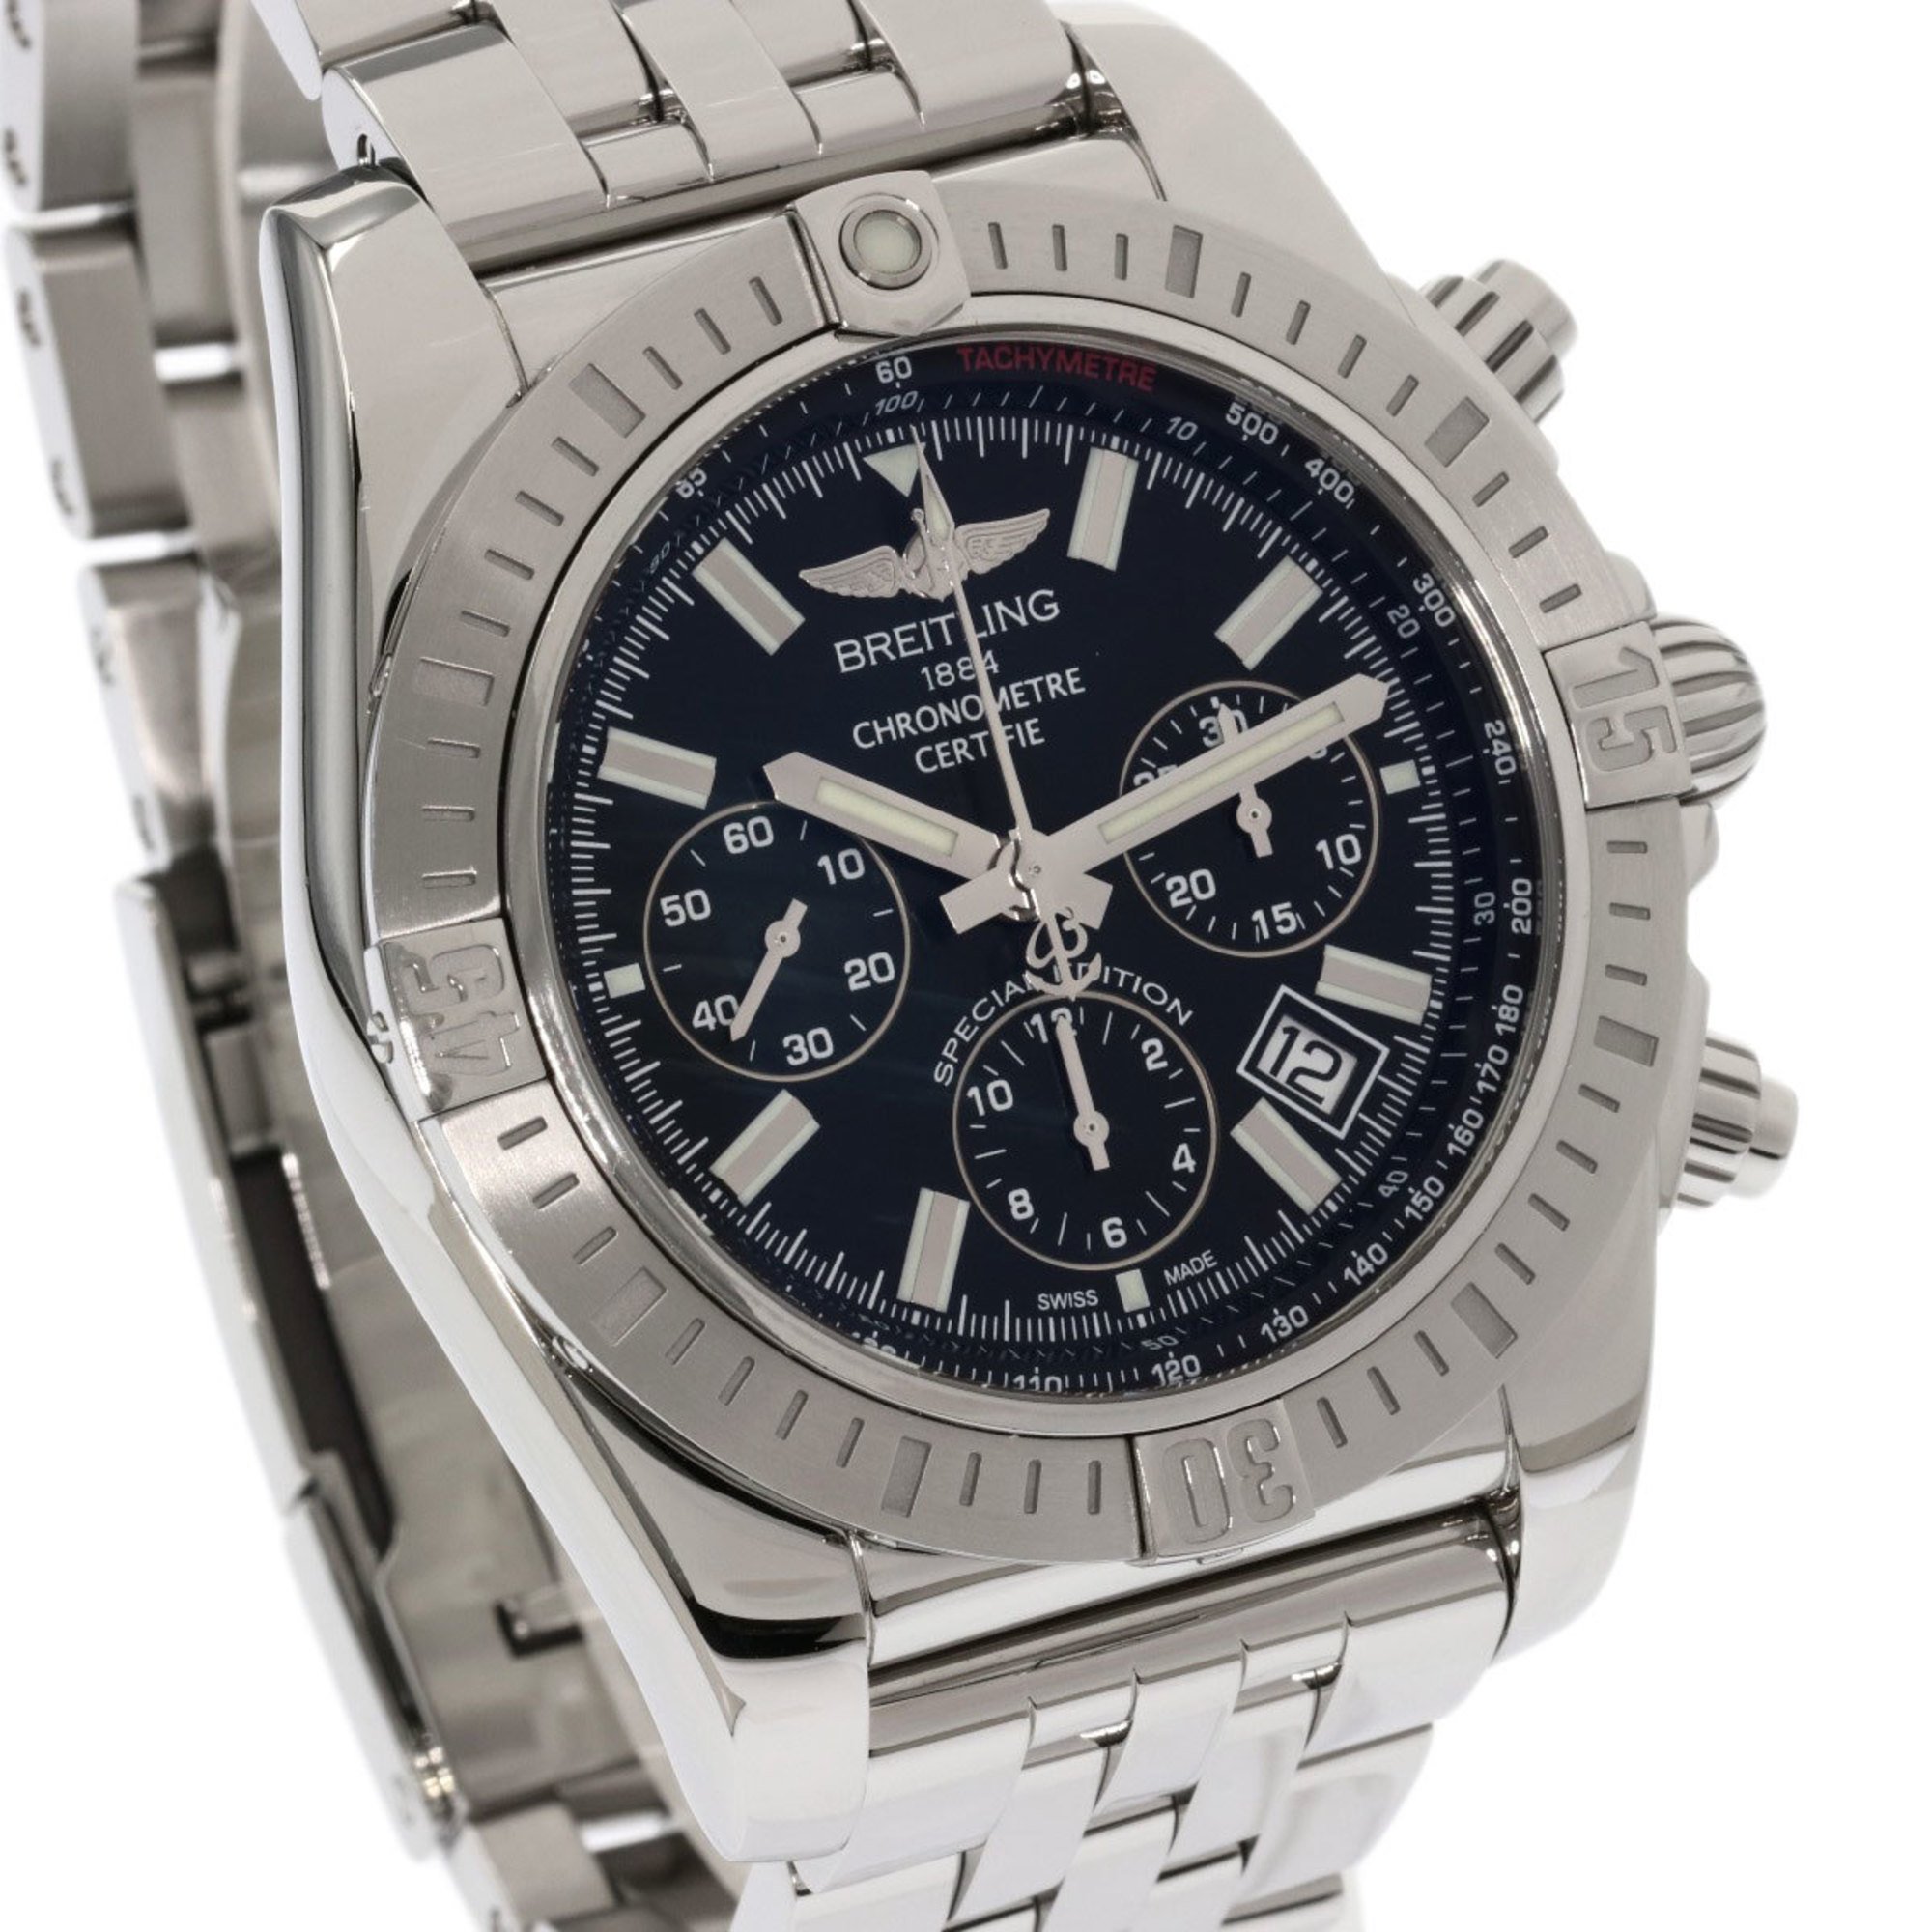 Breitling AB011511 BF70 Chronomat 44 JSP day limited model watch stainless steel SS men's BREITLING